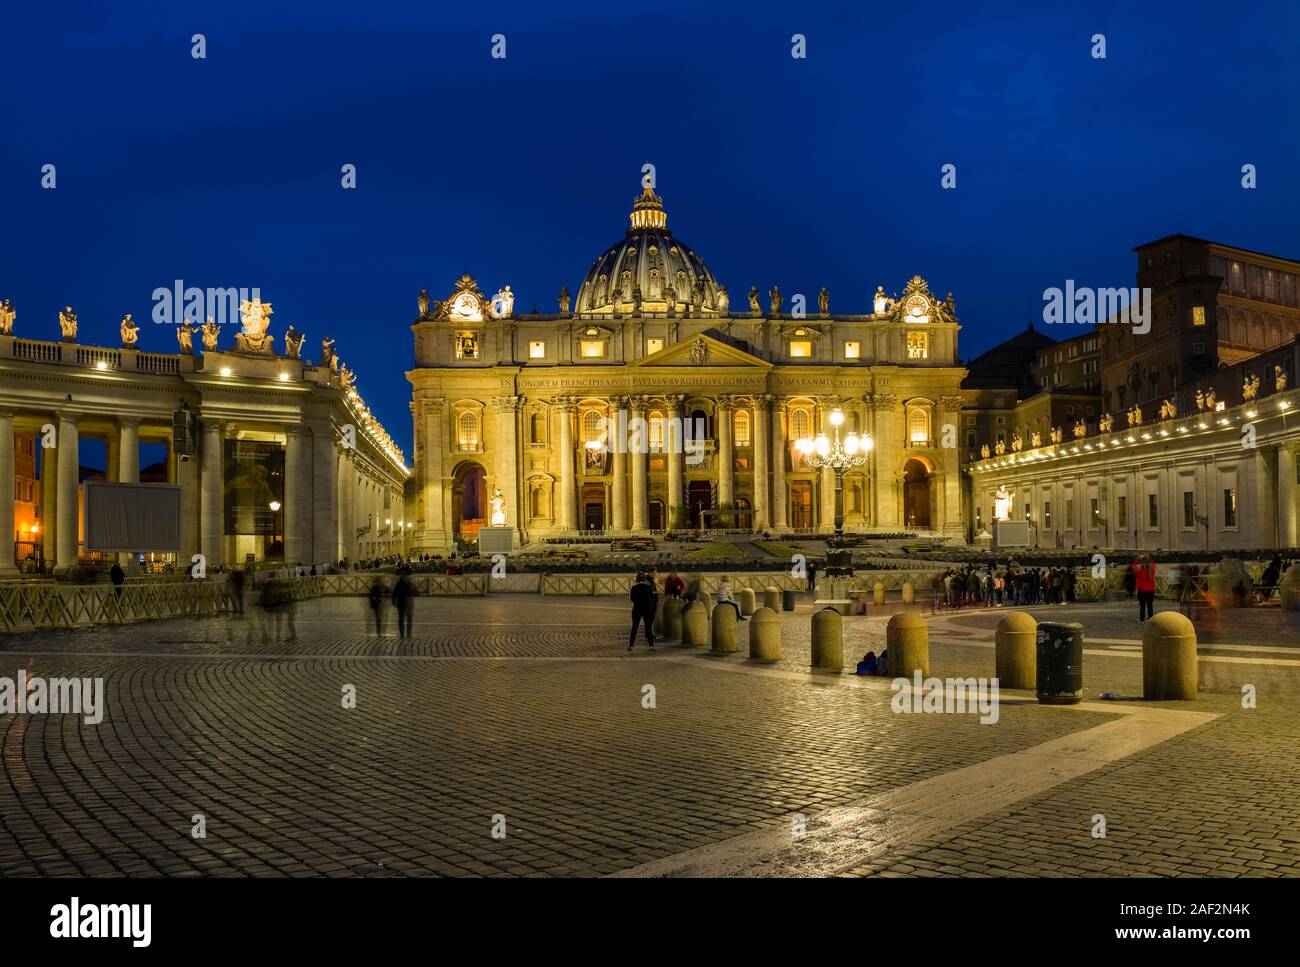 The Papal Basilica of St. Peter, St. Peter's Basilica, seen from St. Peter's Square, illuminated at night Stock Photo